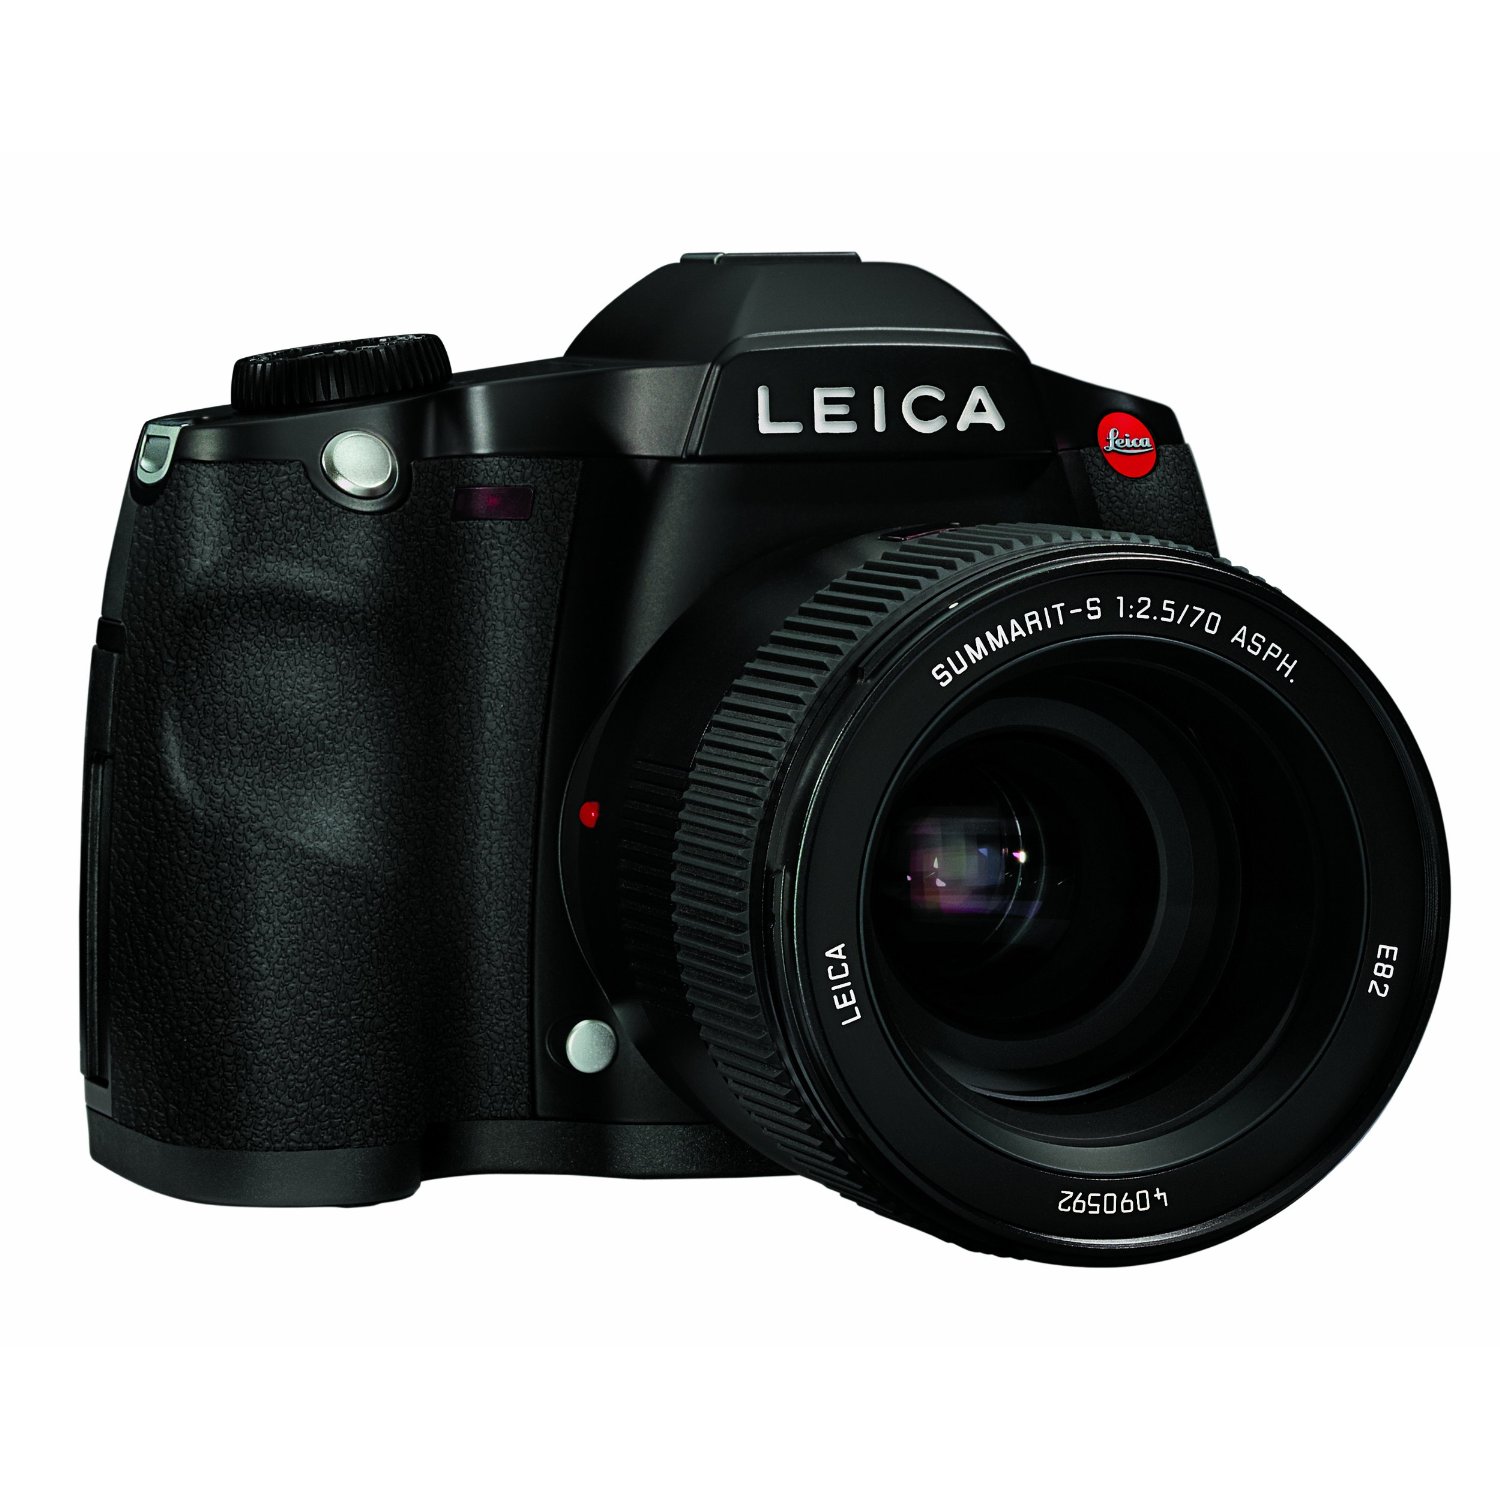 http://thetechjournal.com/wp-content/uploads/images/1109/1316325950-leica-s2-375mp-interchangeable-lens-camera-cost-28000-1.jpg